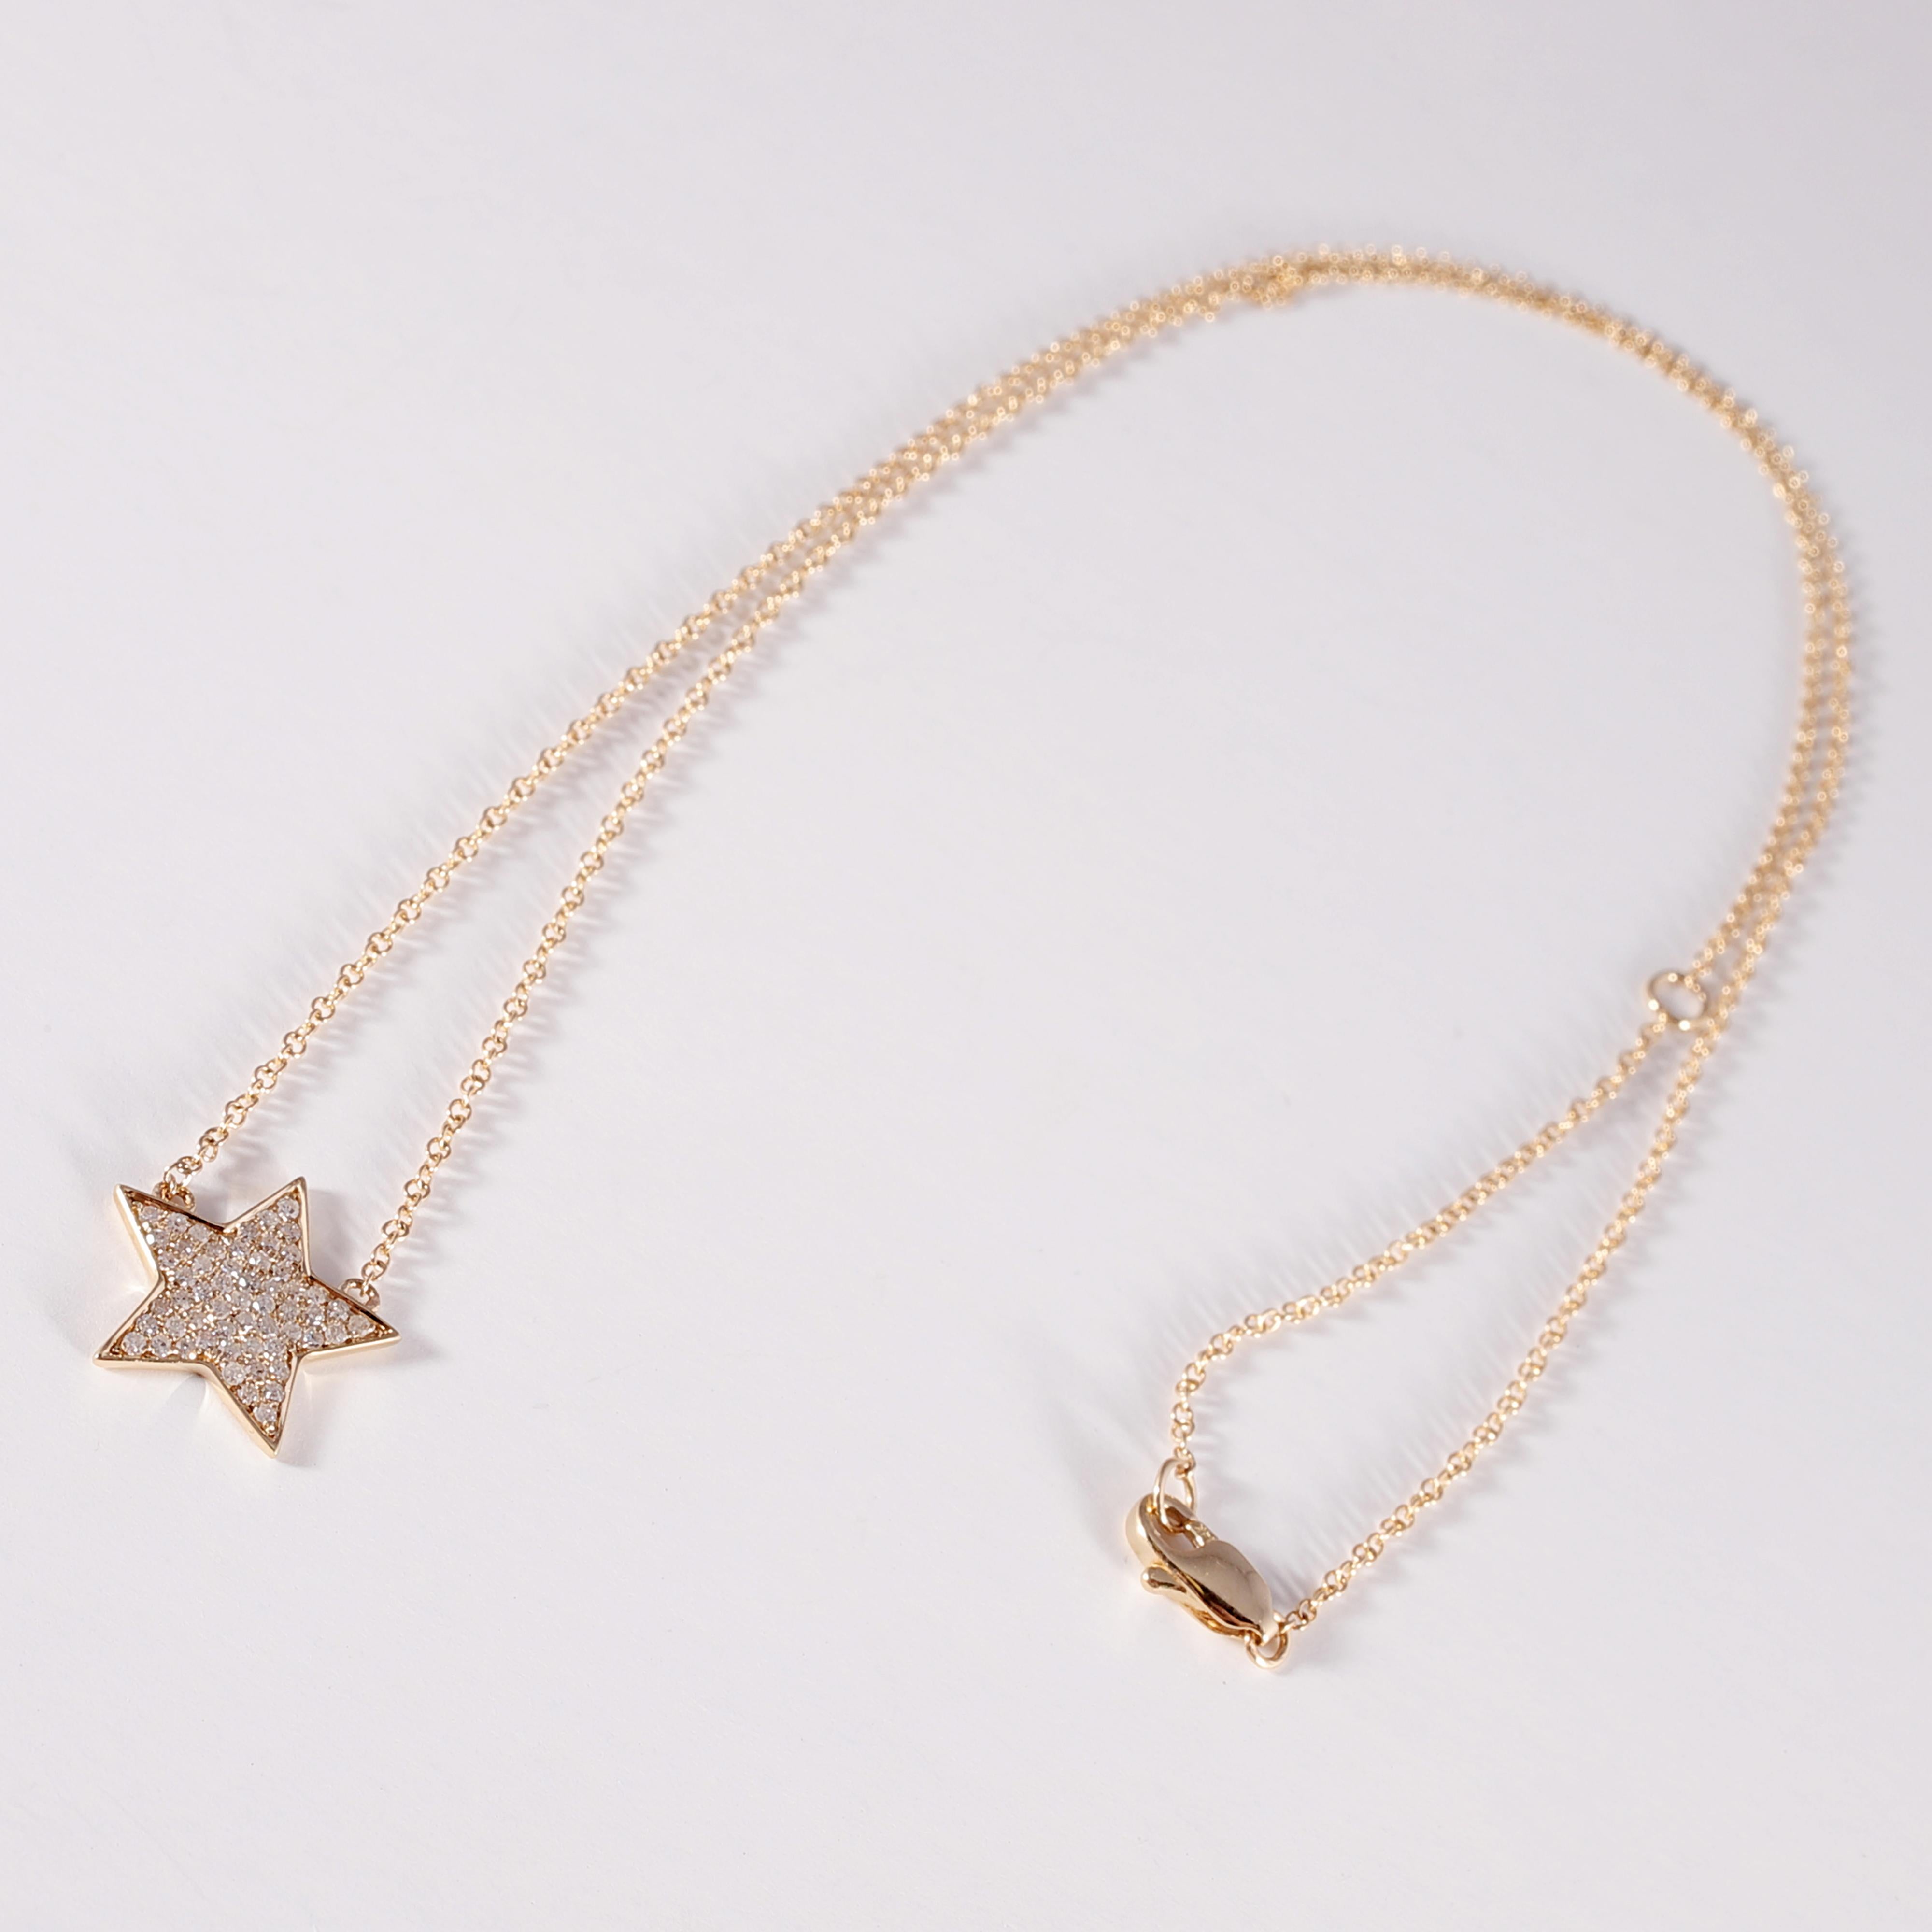 0.21 Carat Diamond Yellow Gold Star Necklace For Sale 2